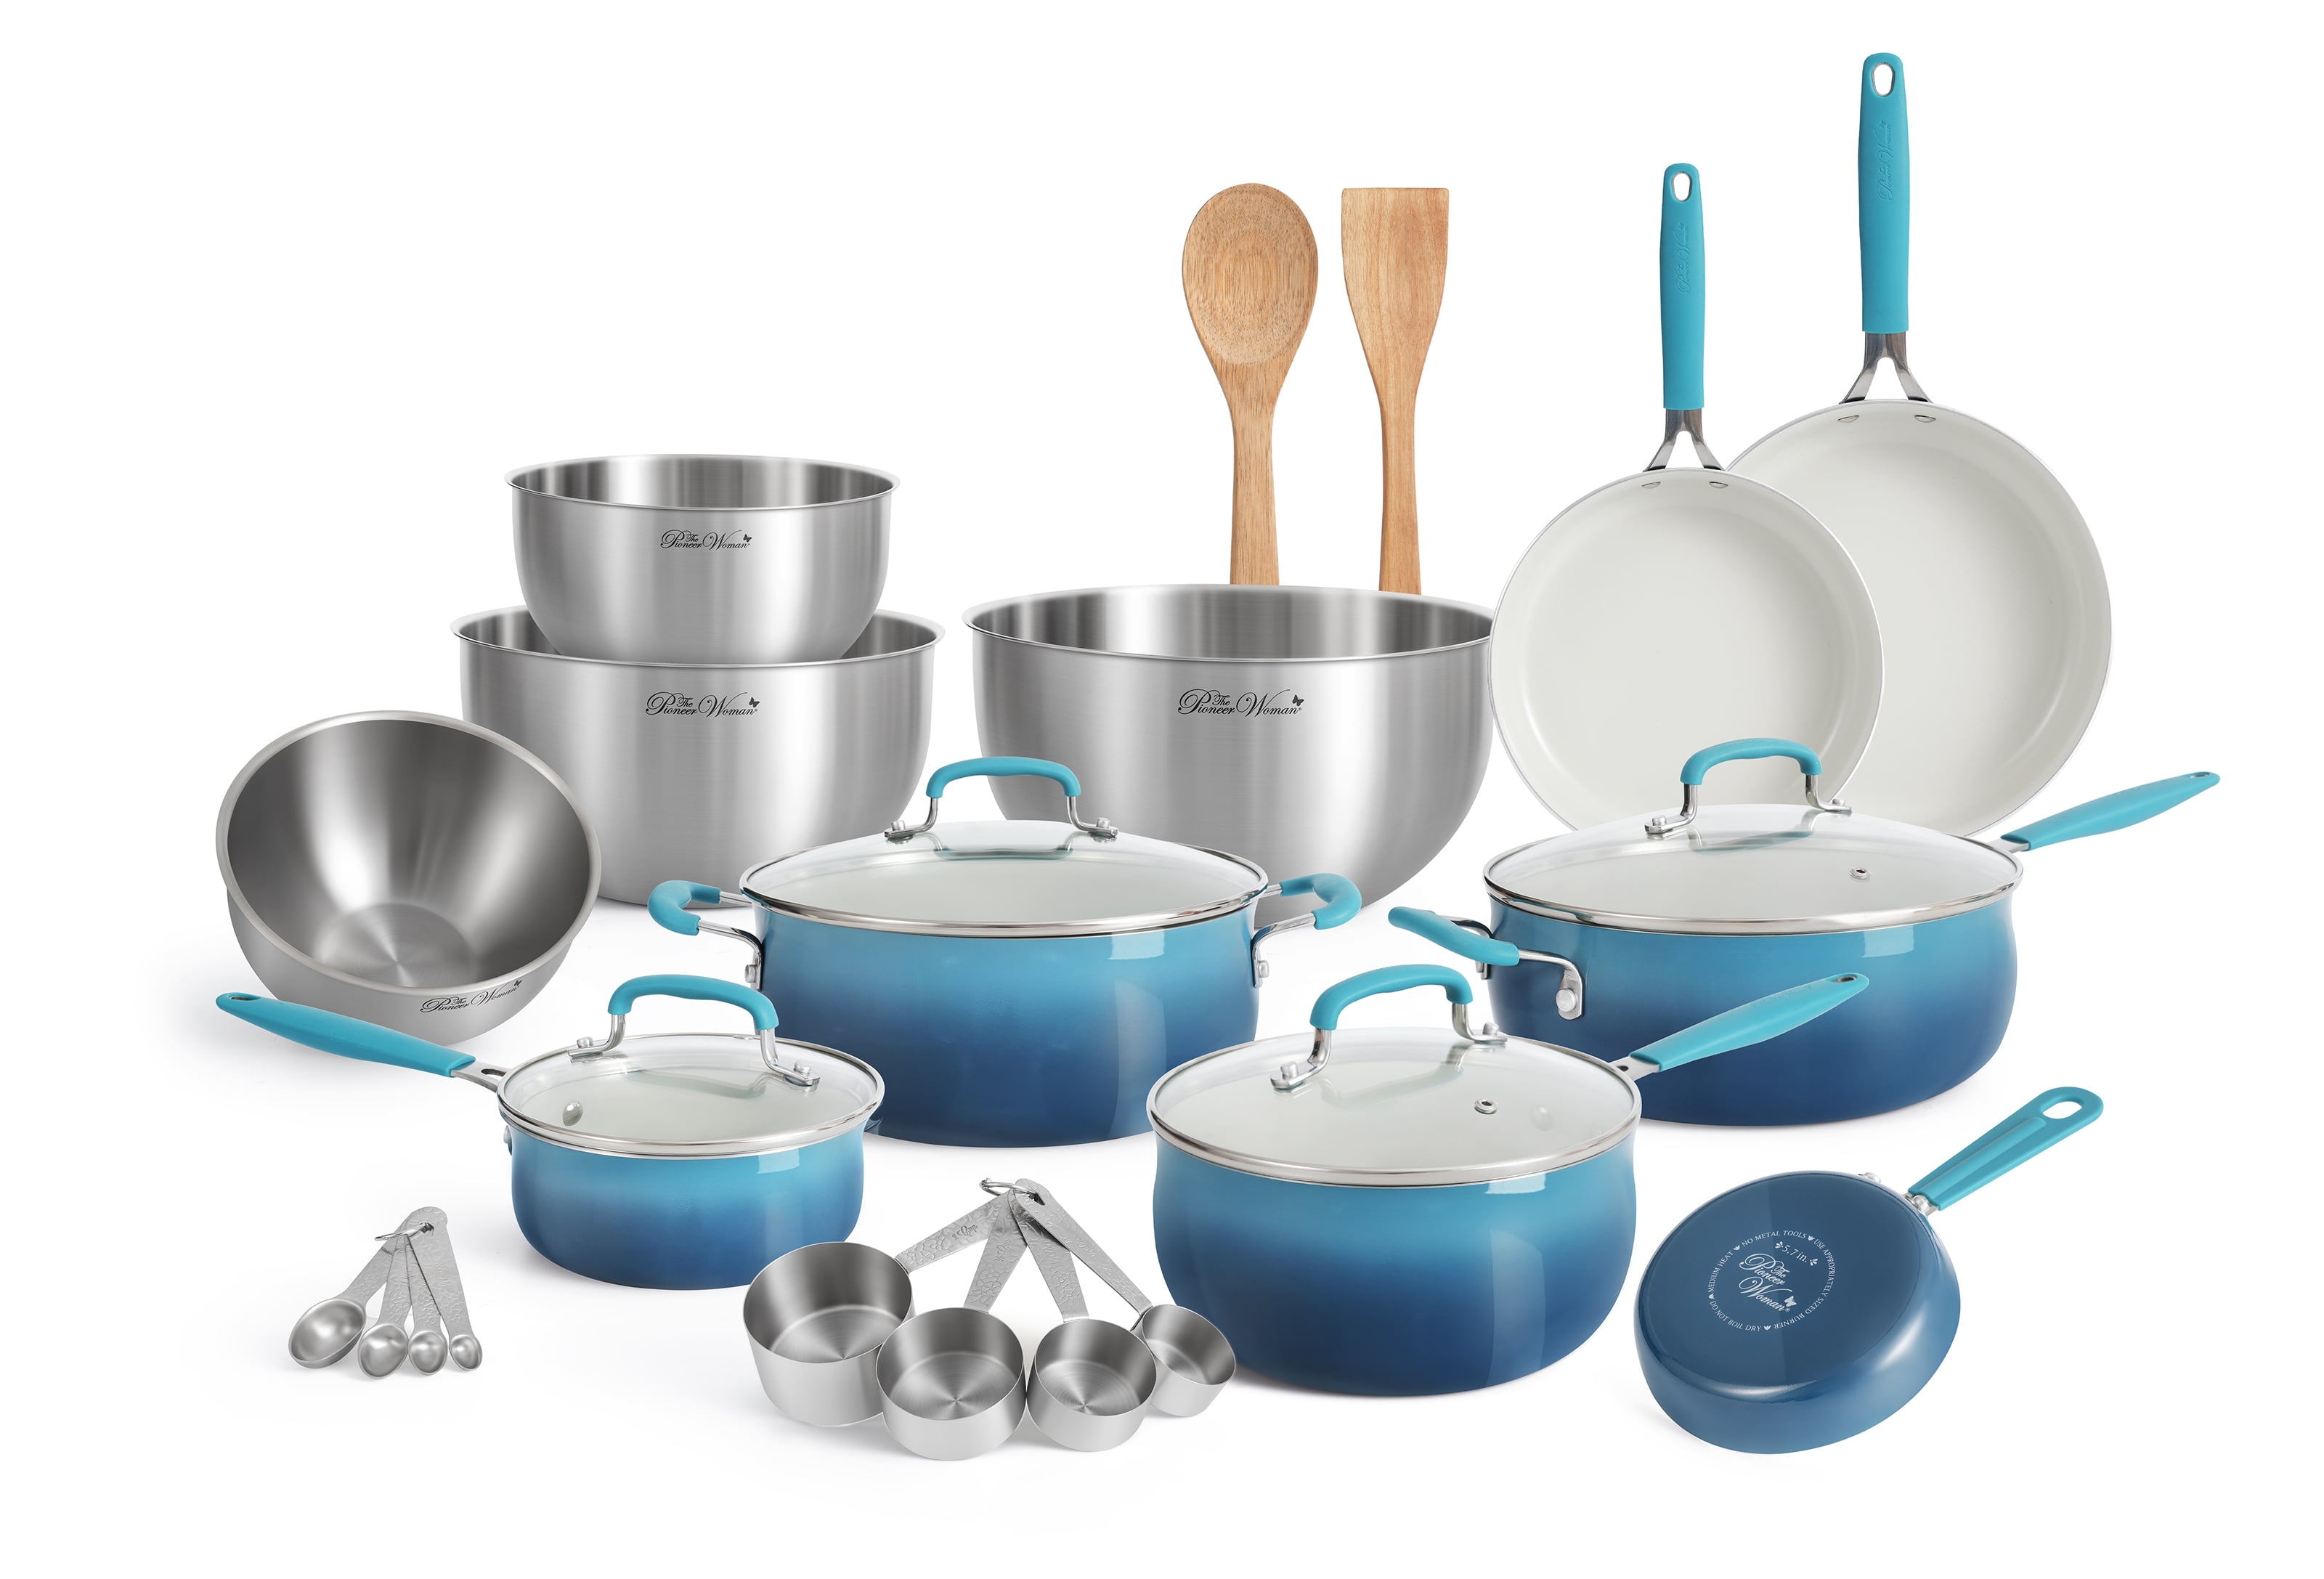 The Pioneer Woman 25 Piece Ceramic Nonstick Aluminum Easy Clean Cookware Set, Ombre Teal